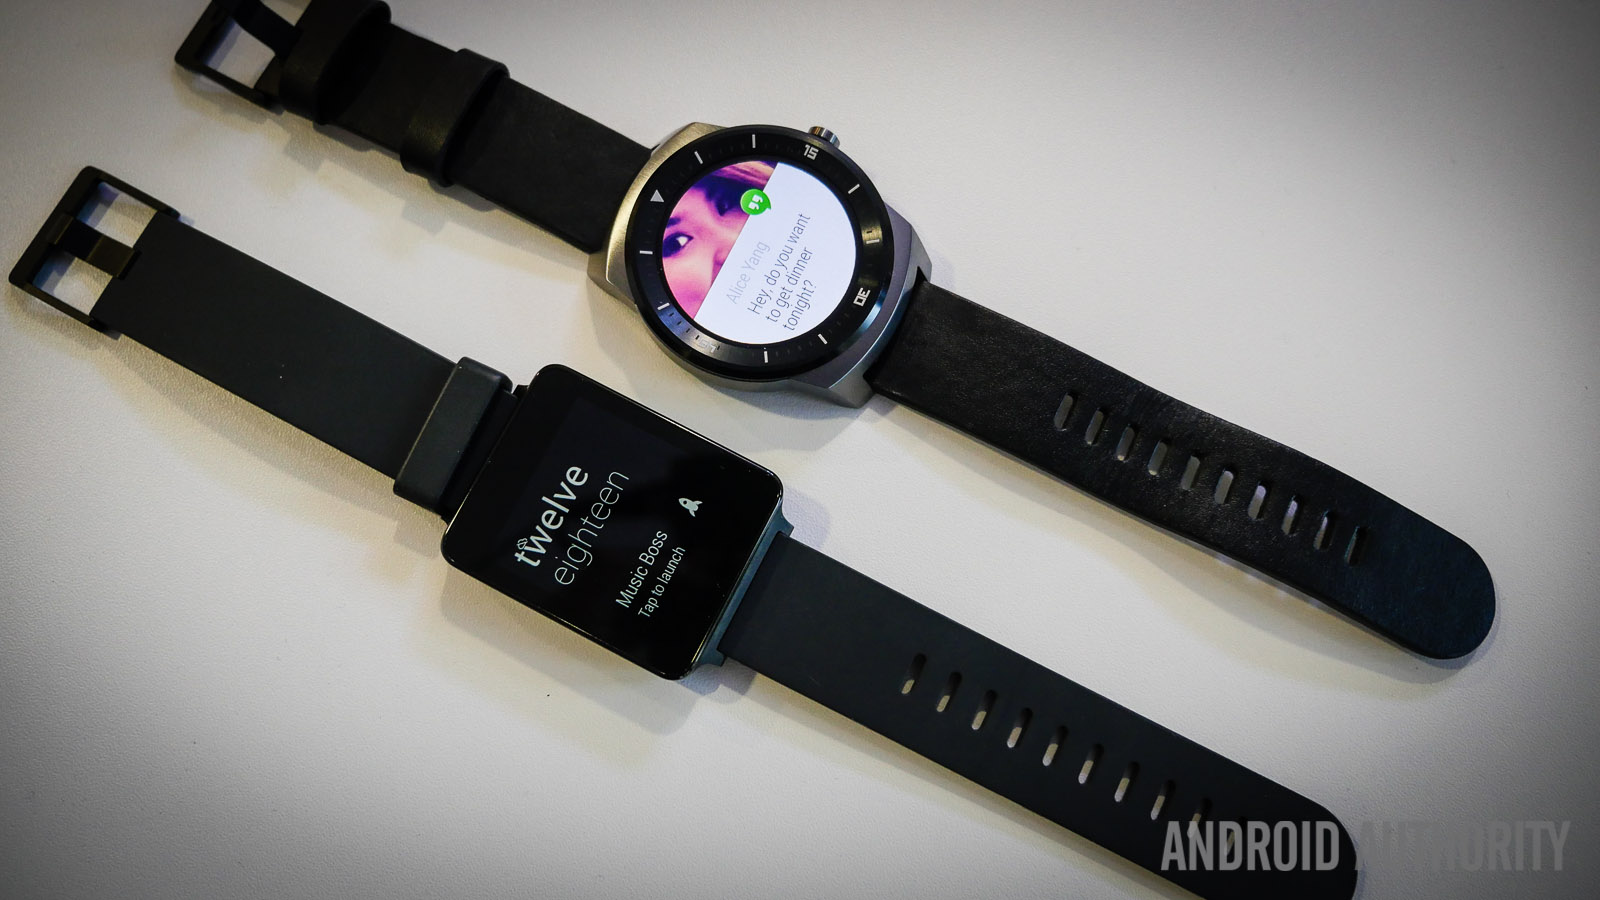 LG G Watch and G Watch R represent some of the competition HTCwill face.